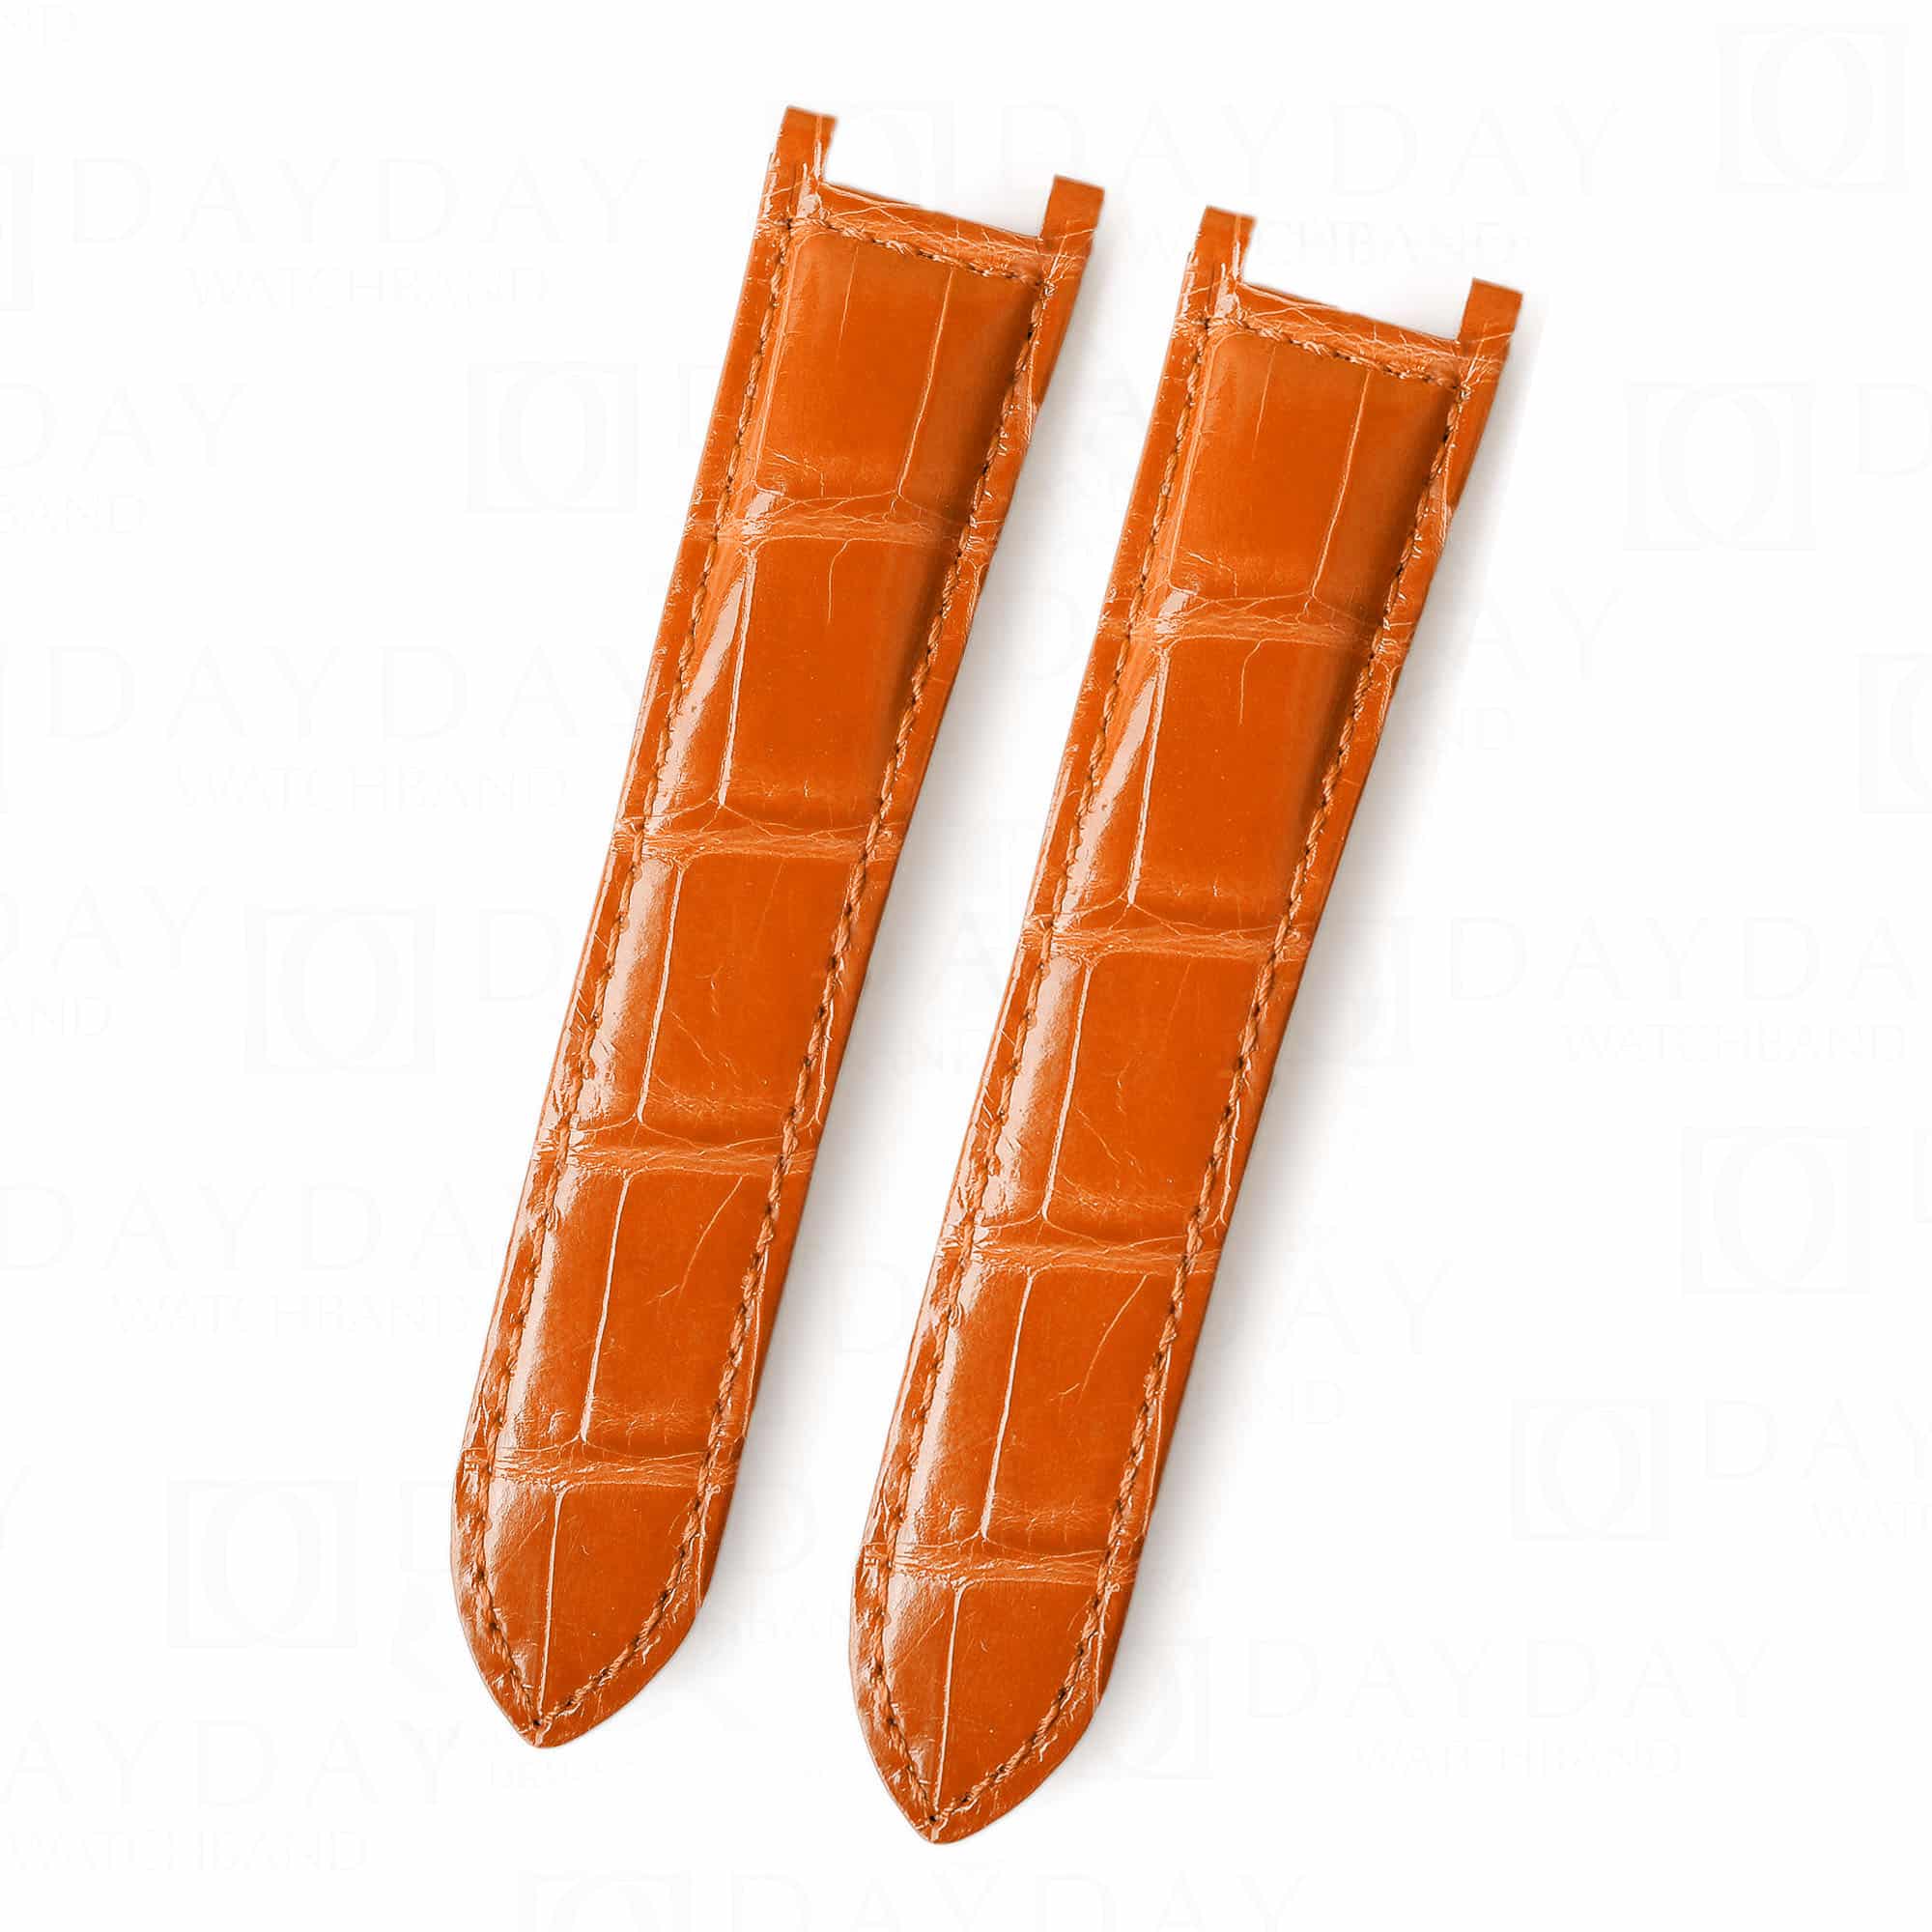 100% handmade orange genuine OEM custom double-folded alligator crocodile leather strap and watch band replacement for Cartier Pasha De watches online - Shop the high-end quality Belly-scale bespoke leathr straps and watchbands online from DR Watchstrap onine at a low price